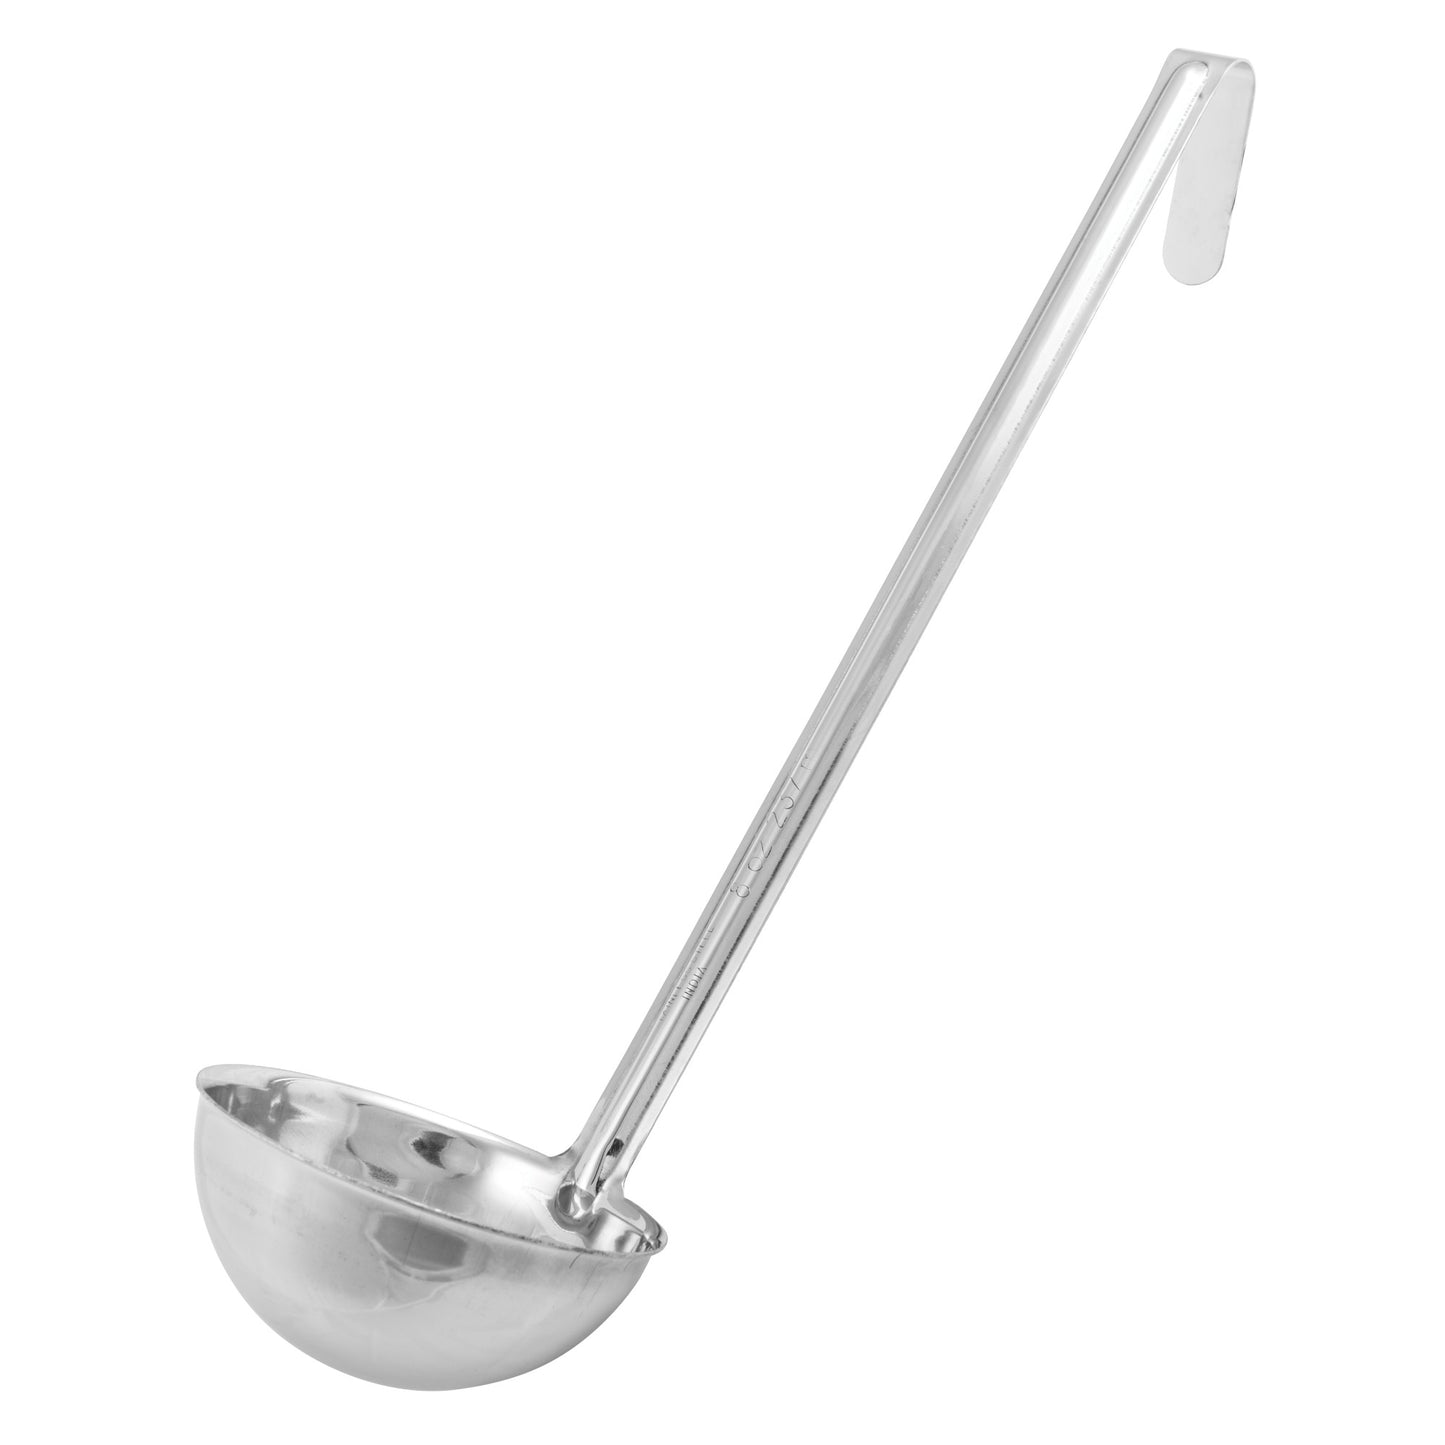 Winco Prime One-Piece Ladle, Stainless Steel - 8 oz